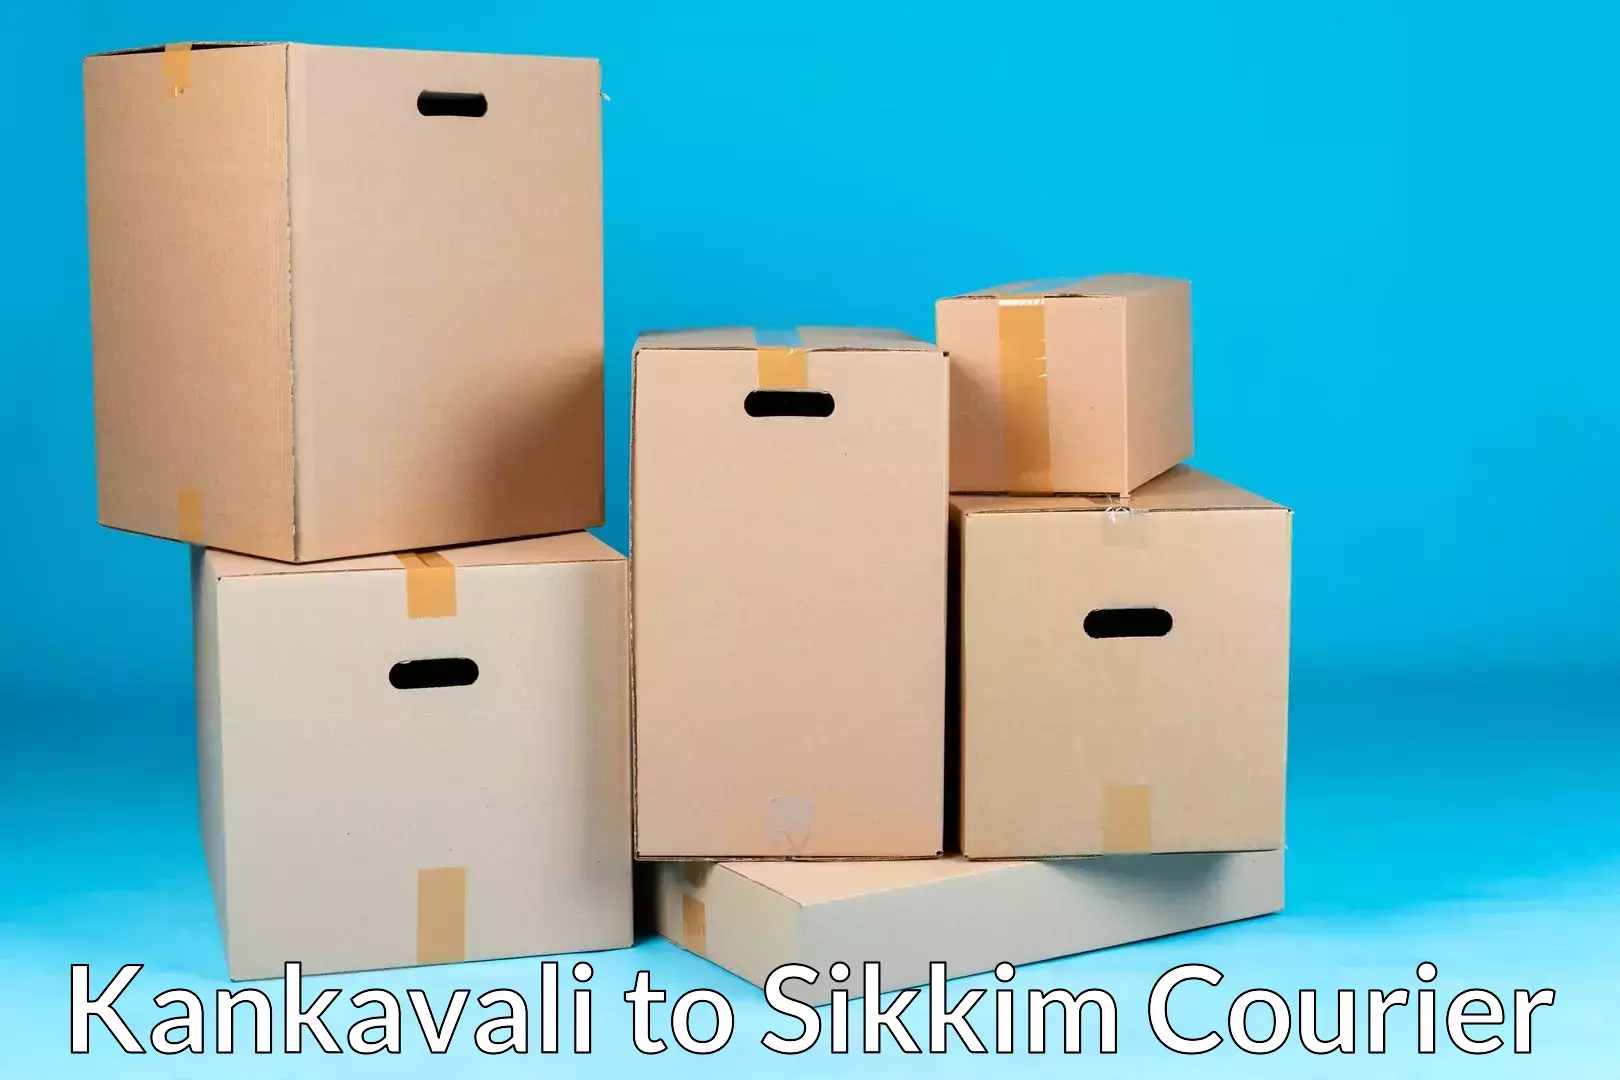 Furniture relocation experts Kankavali to Sikkim